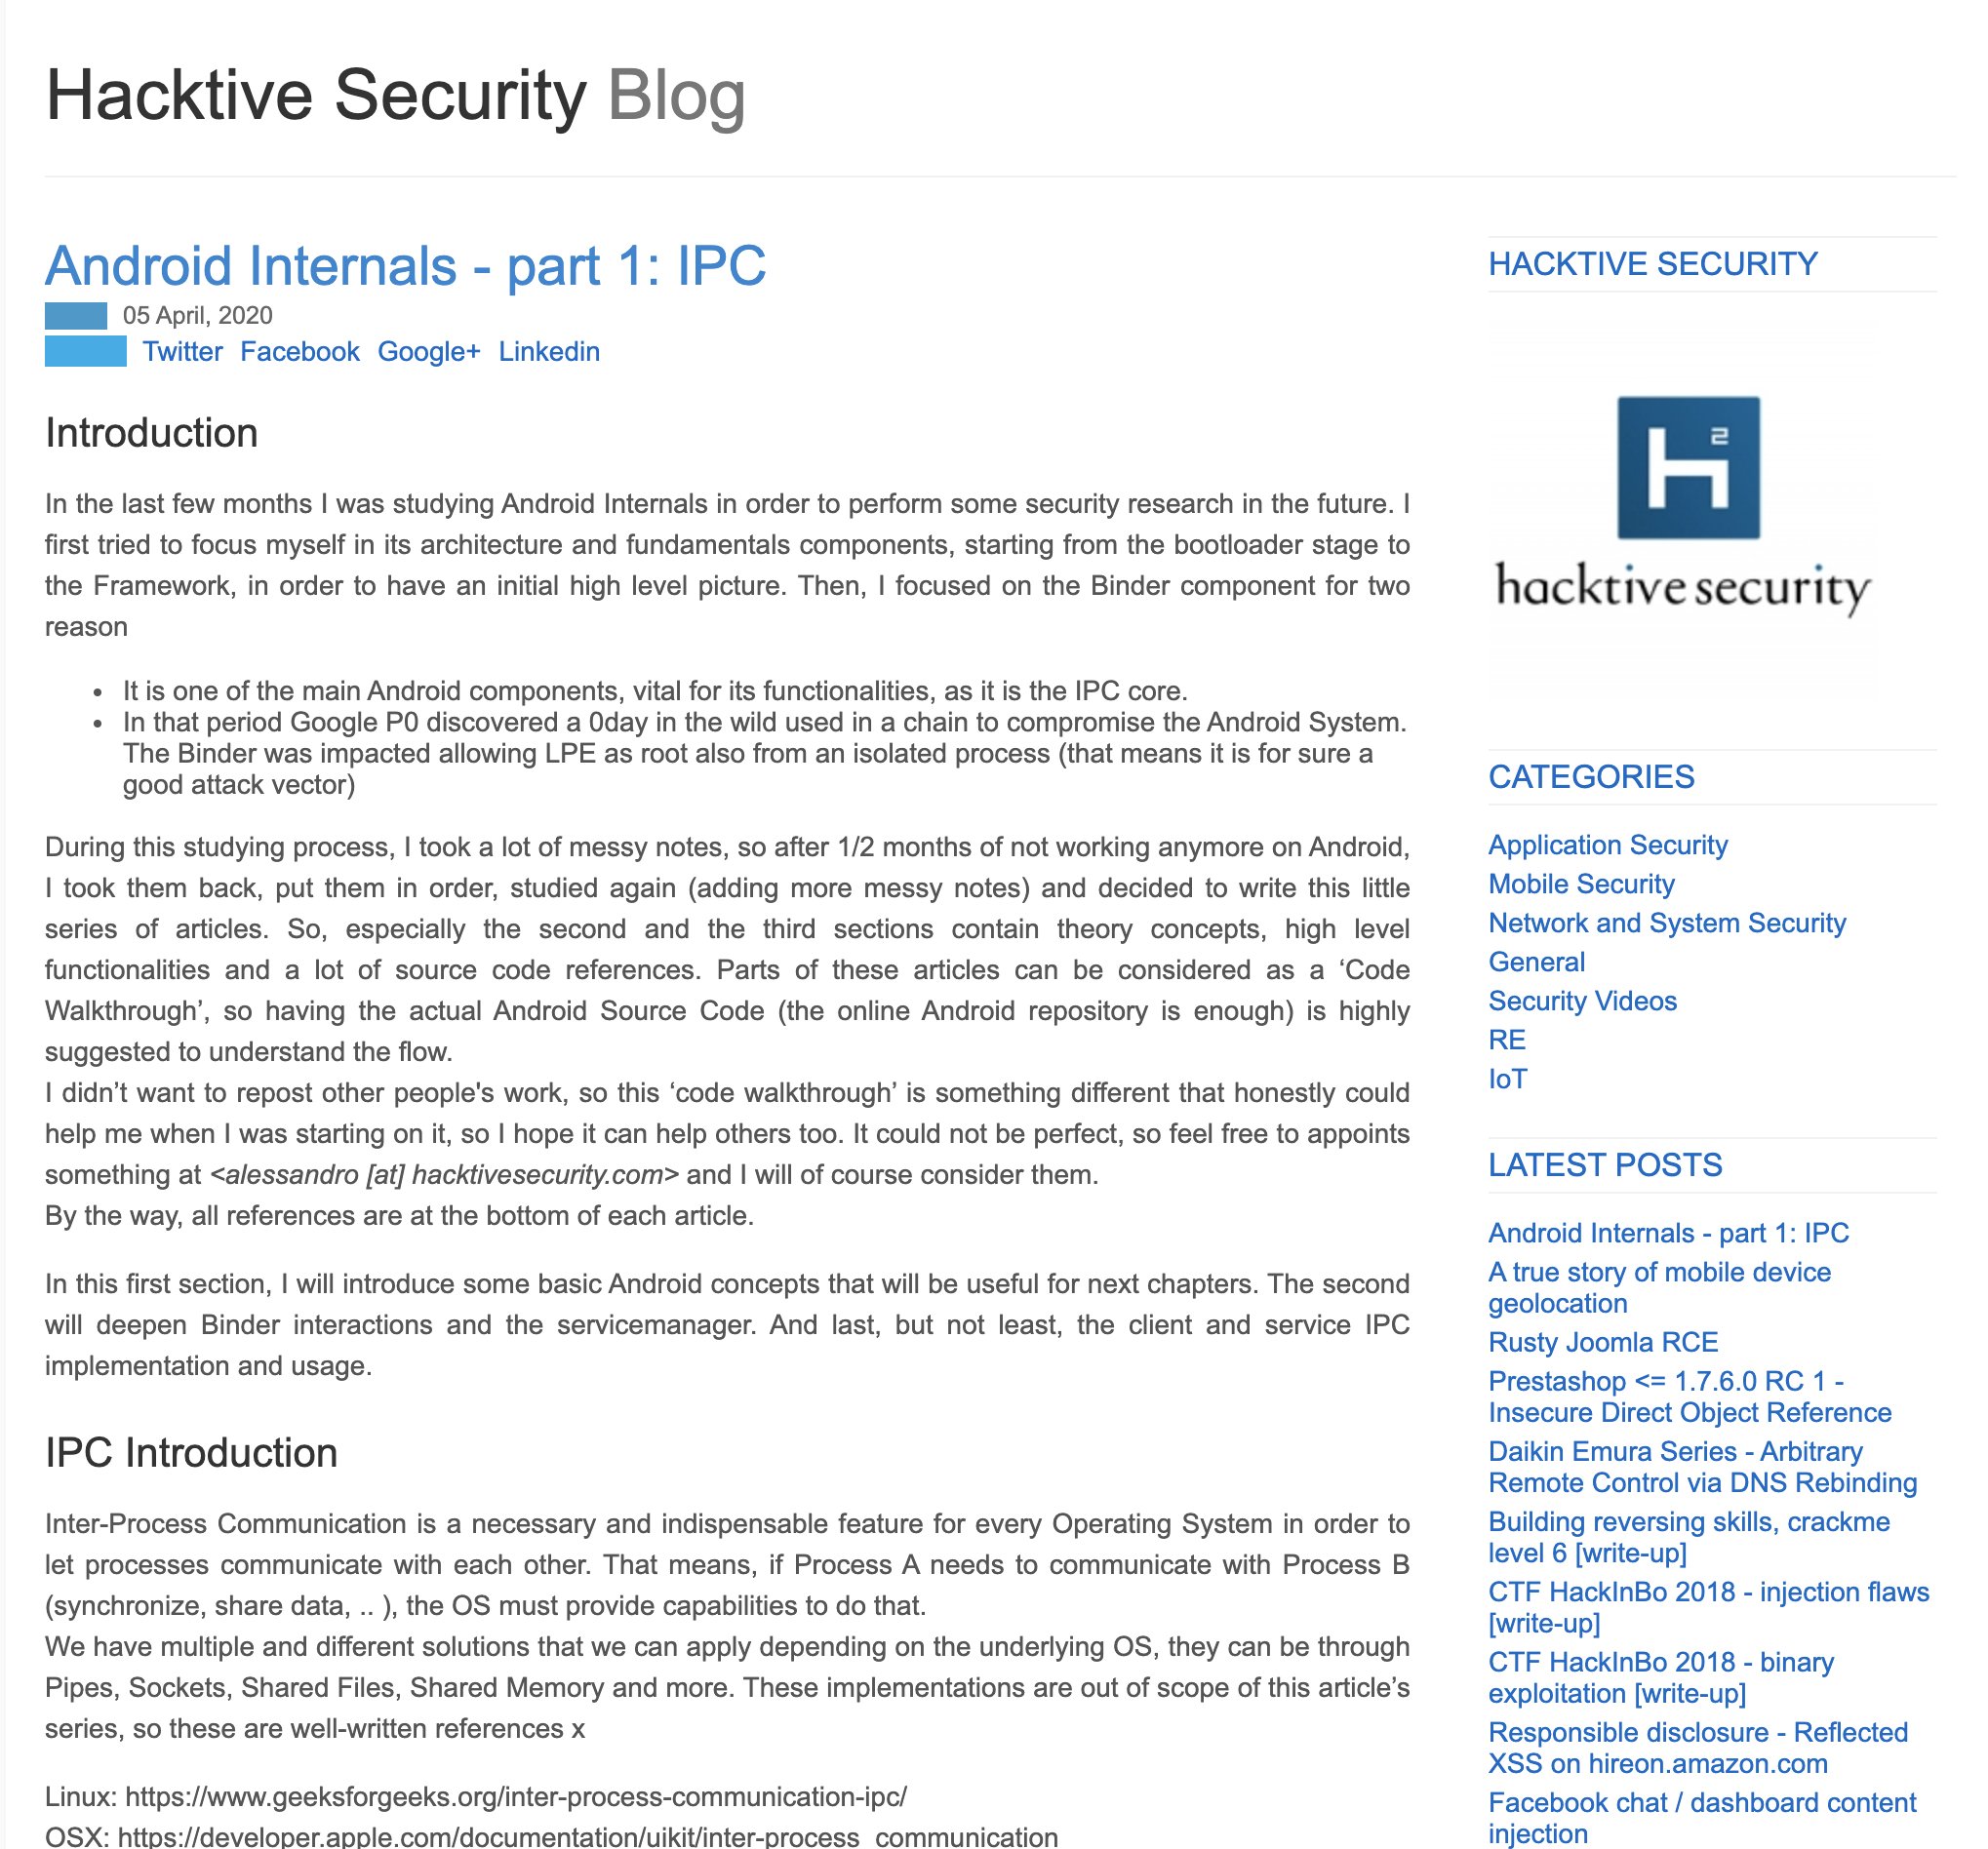 hacktive security on Twitter: "https://t.co/23ssqrsraeJ This is the